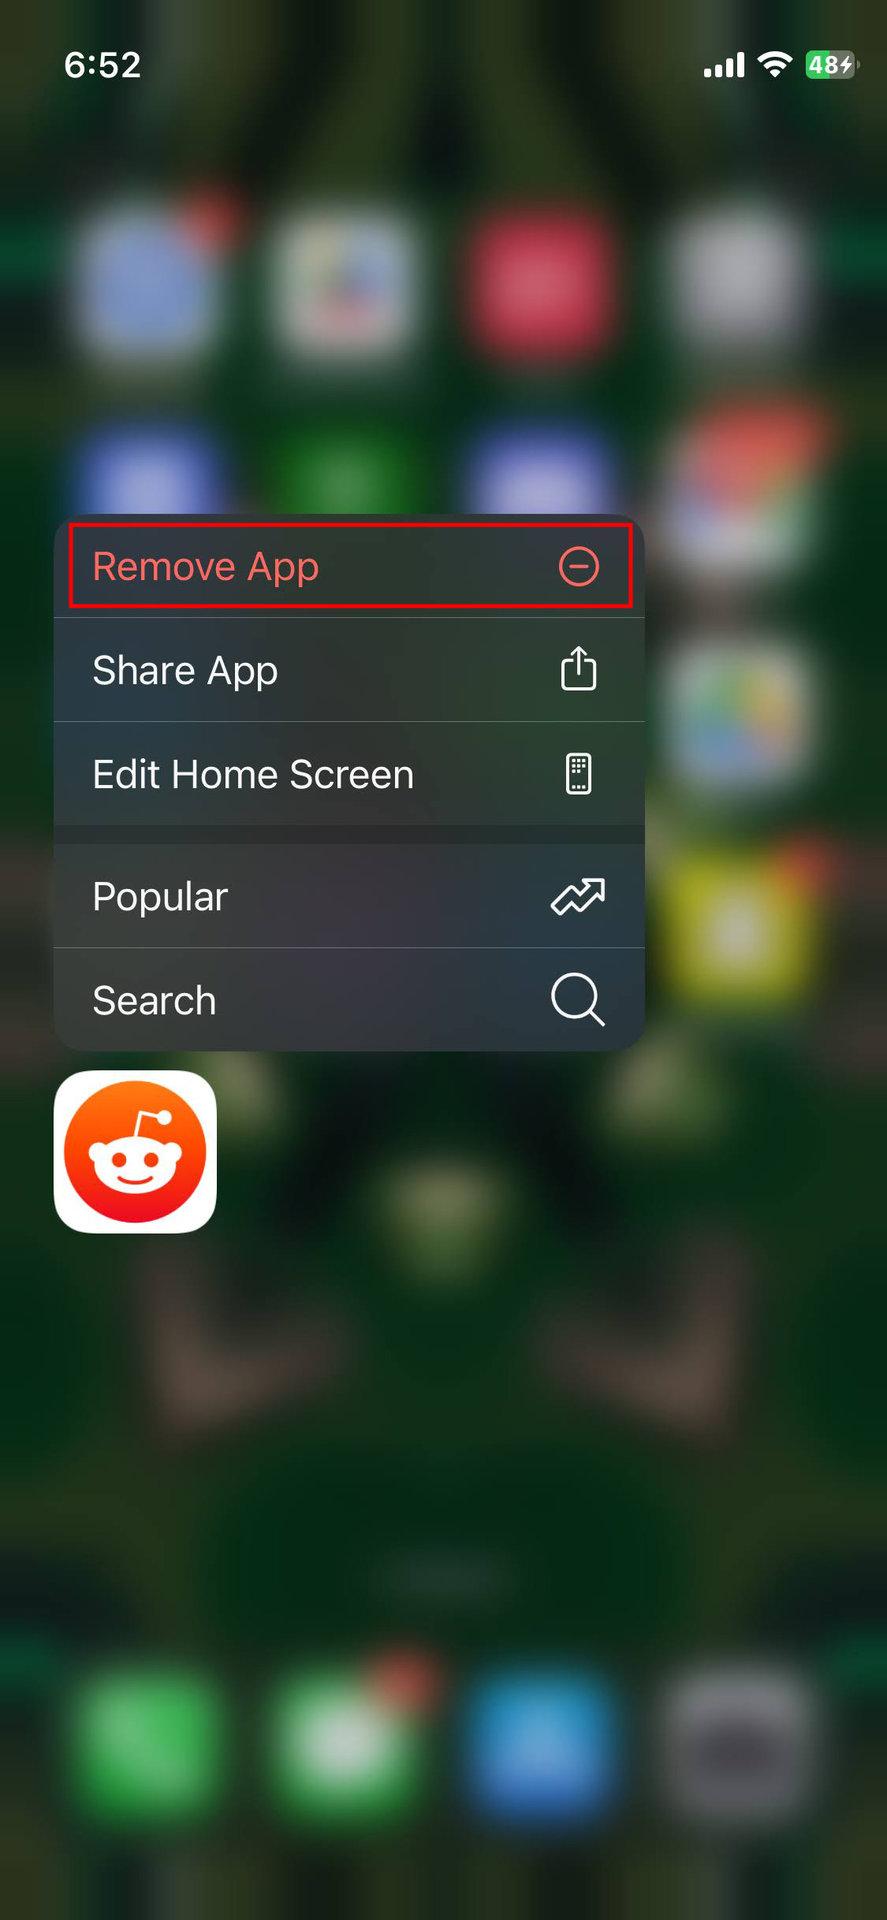 How to uninstall an iPhone app Reddit (2)